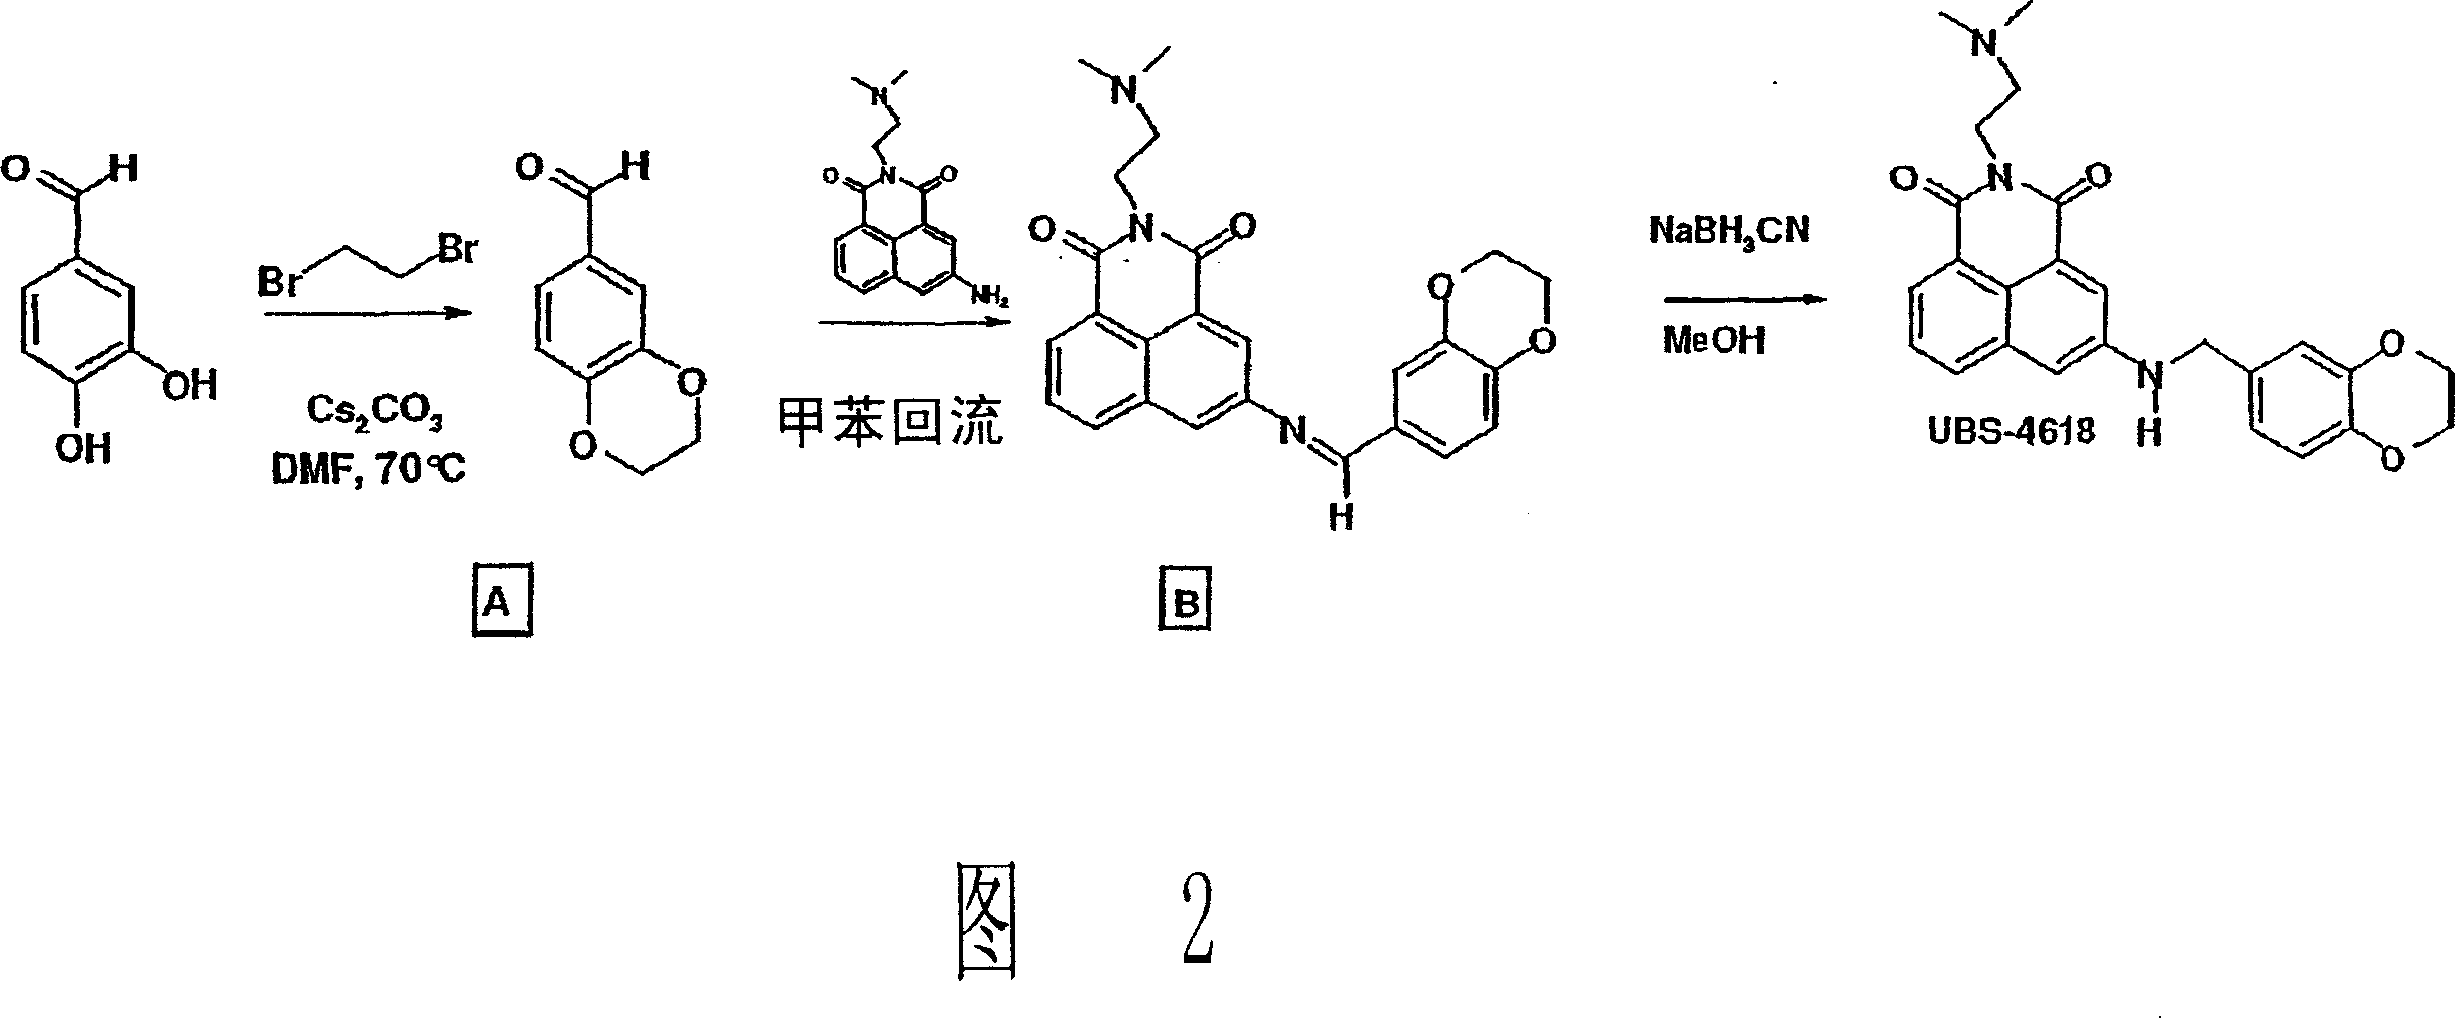 Naphthalimide derivatives for the treatment of cancer